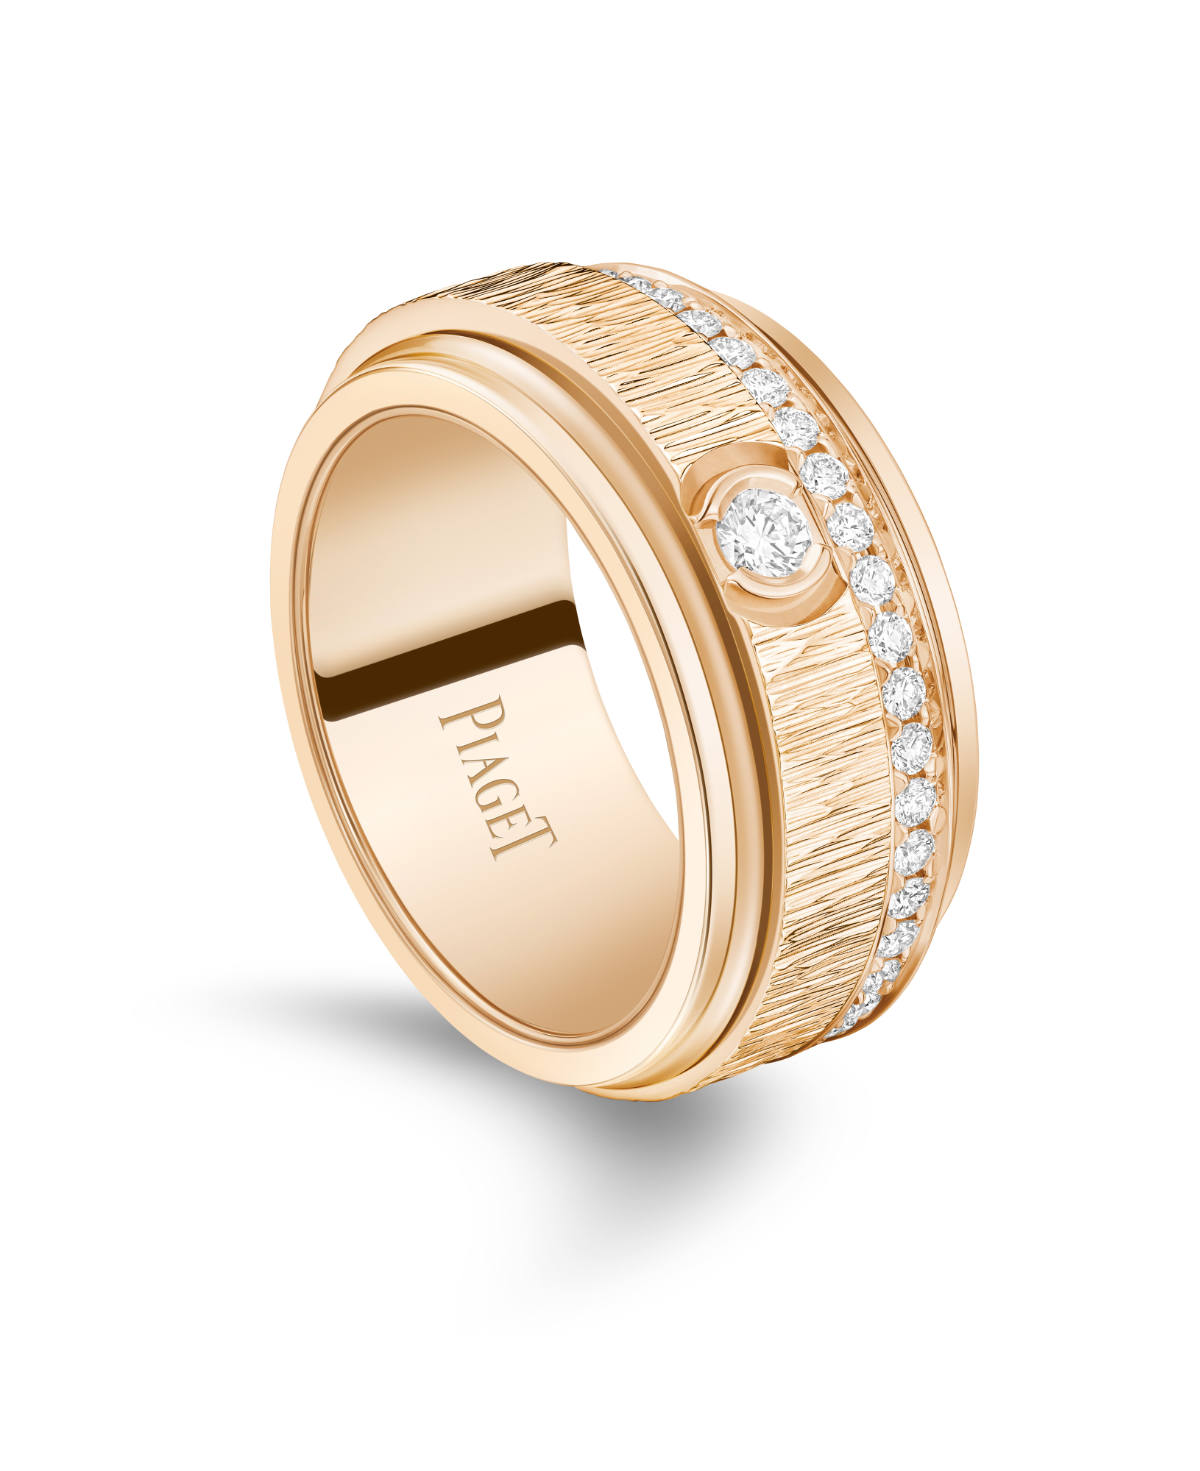 Piaget Presents Its New Collection: The Possession